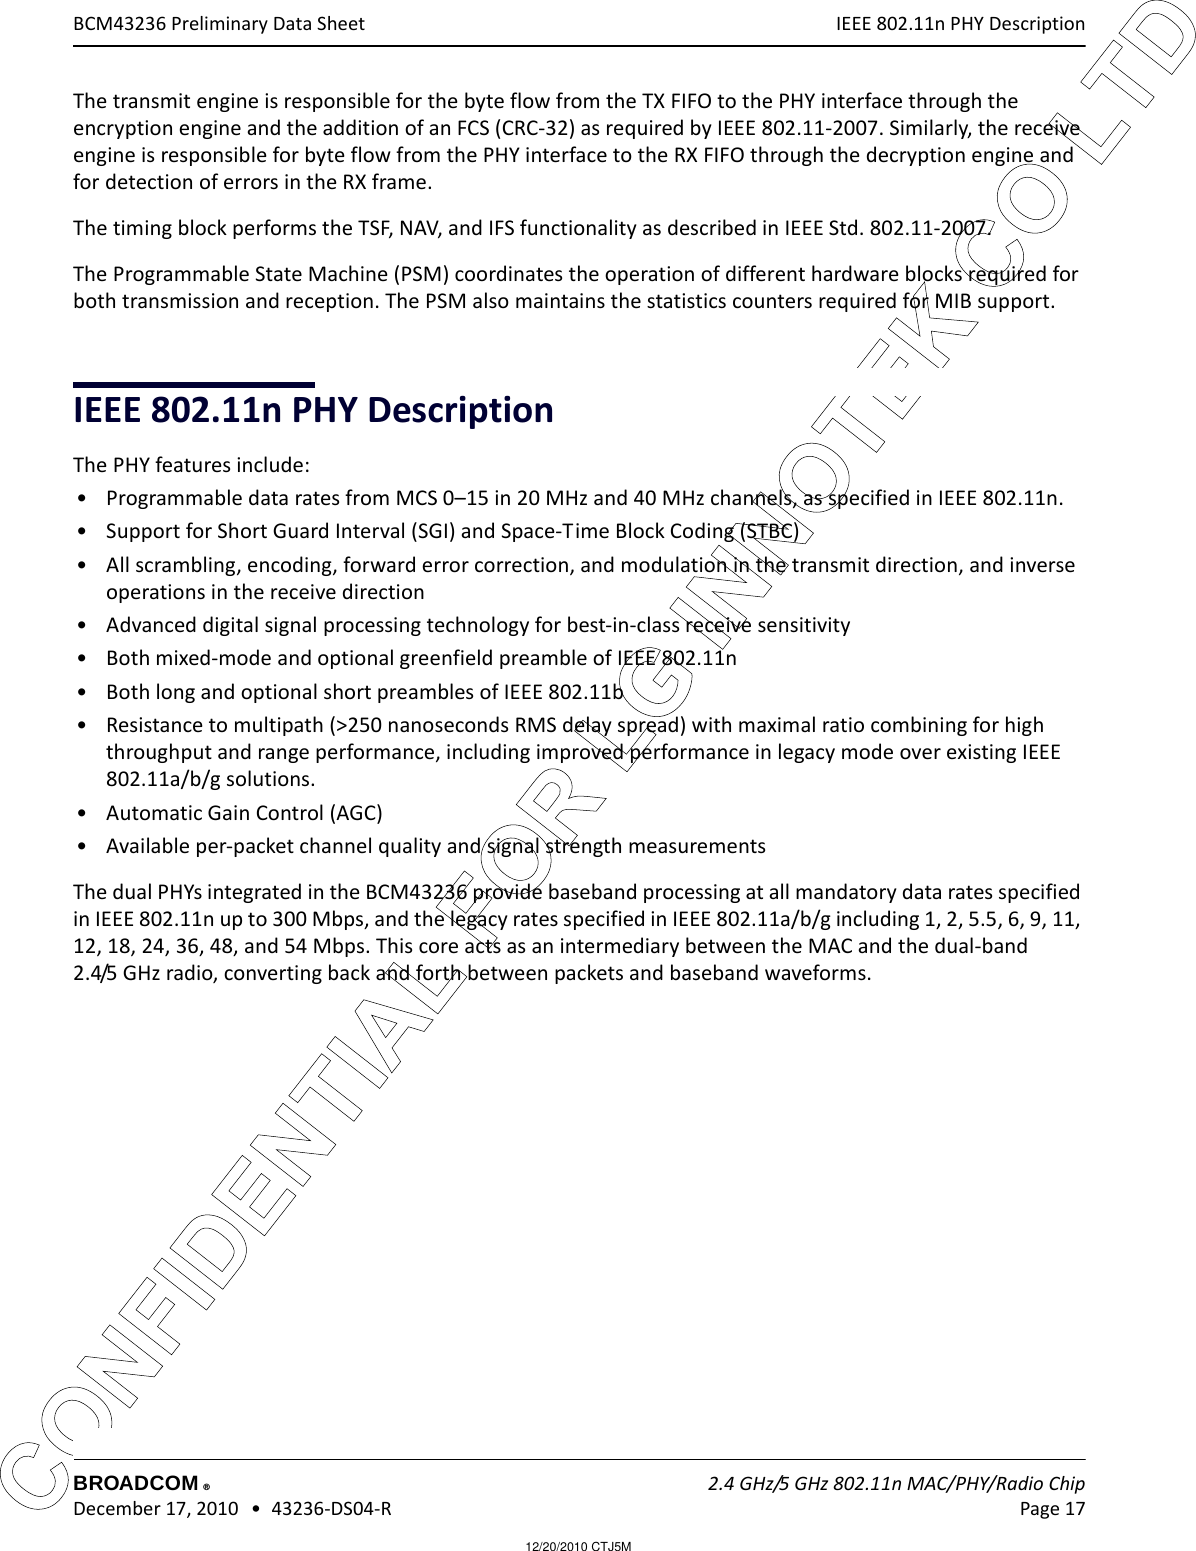 12/20/2010 CTJ5MCONFIDENTIAL FOR LG INNOTEK CO LTD IEEE 802.11n PHY DescriptionBROADCOM    2.4 GHz/5 GHz 802.11n MAC/PHY/Radio Chip December 17, 2010   •  43236-DS04-R Page 17®BCM43236 Preliminary Data SheetThe transmit engine is responsible for the byte flow from the TX FIFO to the PHY interface through the encryption engine and the addition of an FCS (CRC-32) as required by IEEE 802.11-2007. Similarly, the receive engine is responsible for byte flow from the PHY interface to the RX FIFO through the decryption engine and for detection of errors in the RX frame.The timing block performs the TSF, NAV, and IFS functionality as described in IEEE Std. 802.11-2007.The Programmable State Machine (PSM) coordinates the operation of different hardware blocks required for both transmission and reception. The PSM also maintains the statistics counters required for MIB support.IEEE 802.11n PHY DescriptionThe PHY features include:• Programmable data rates from MCS 0–15 in 20 MHz and 40 MHz channels, as specified in IEEE 802.11n.• Support for Short Guard Interval (SGI) and Space-Time Block Coding (STBC)• All scrambling, encoding, forward error correction, and modulation in the transmit direction, and inverse operations in the receive direction• Advanced digital signal processing technology for best-in-class receive sensitivity• Both mixed-mode and optional greenfield preamble of IEEE 802.11n• Both long and optional short preambles of IEEE 802.11b• Resistance to multipath (&gt;250 nanoseconds RMS delay spread) with maximal ratio combining for high throughput and range performance, including improved performance in legacy mode over existing IEEE 802.11a/b/g solutions.• Automatic Gain Control (AGC)• Available per-packet channel quality and signal strength measurementsThe dual PHYs integrated in the BCM43236 provide baseband processing at all mandatory data rates specified in IEEE 802.11n up to 300 Mbps, and the legacy rates specified in IEEE 802.11a/b/g including 1, 2, 5.5, 6, 9, 11, 12, 18, 24, 36, 48, and 54 Mbps. This core acts as an intermediary between the MAC and the dual-band  2.4/5 GHz radio, converting back and forth between packets and baseband waveforms.